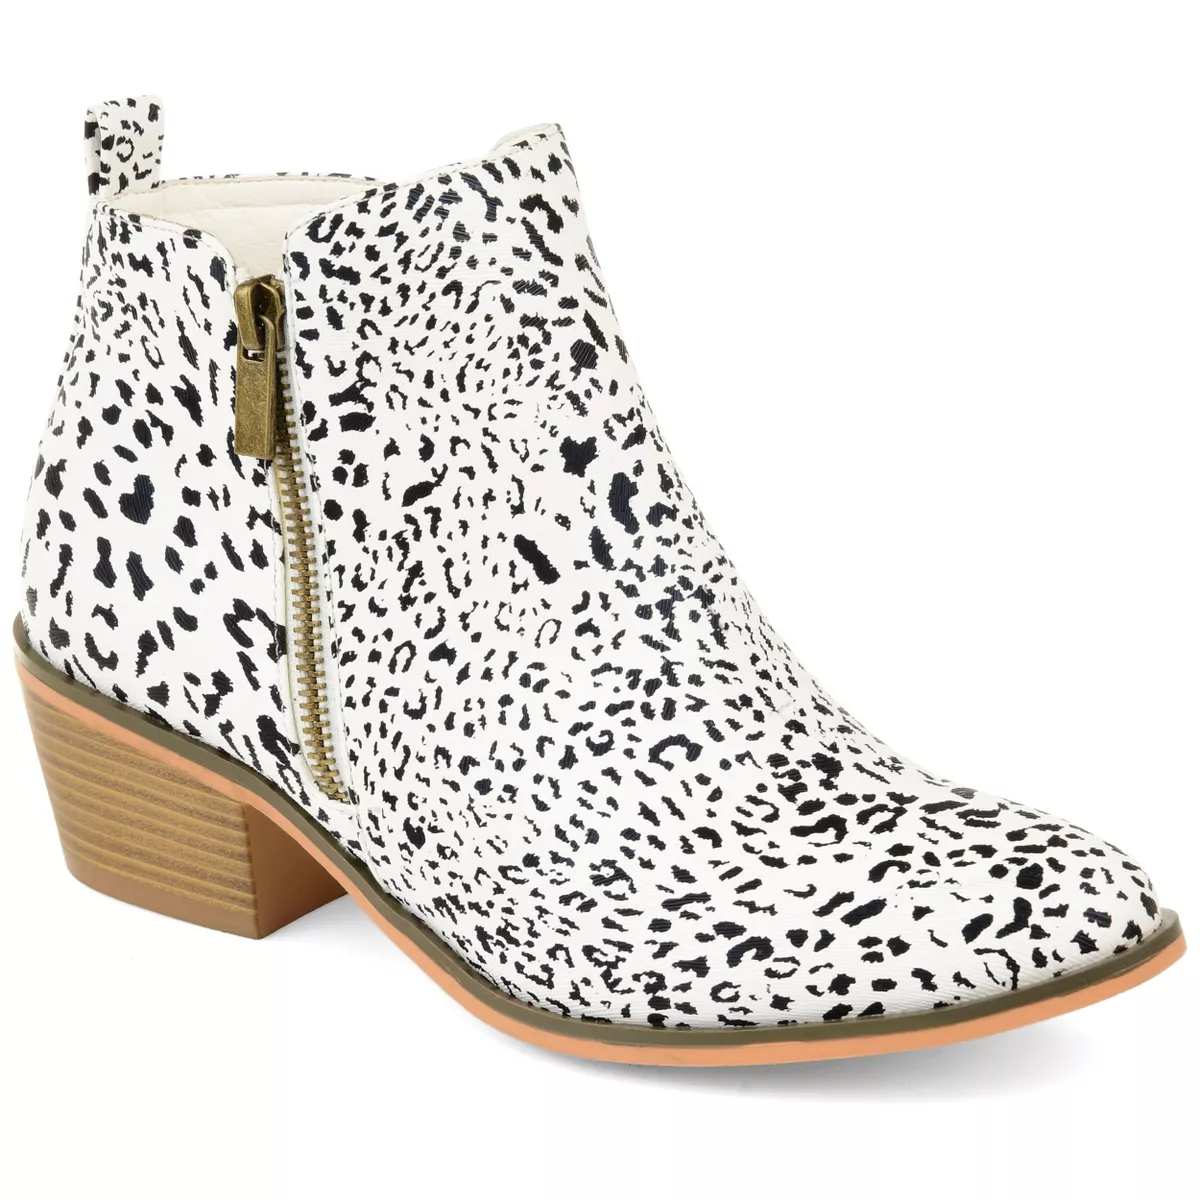 Ankle boot with animal print and side zipper, suitable for fashion-forward shopping choices